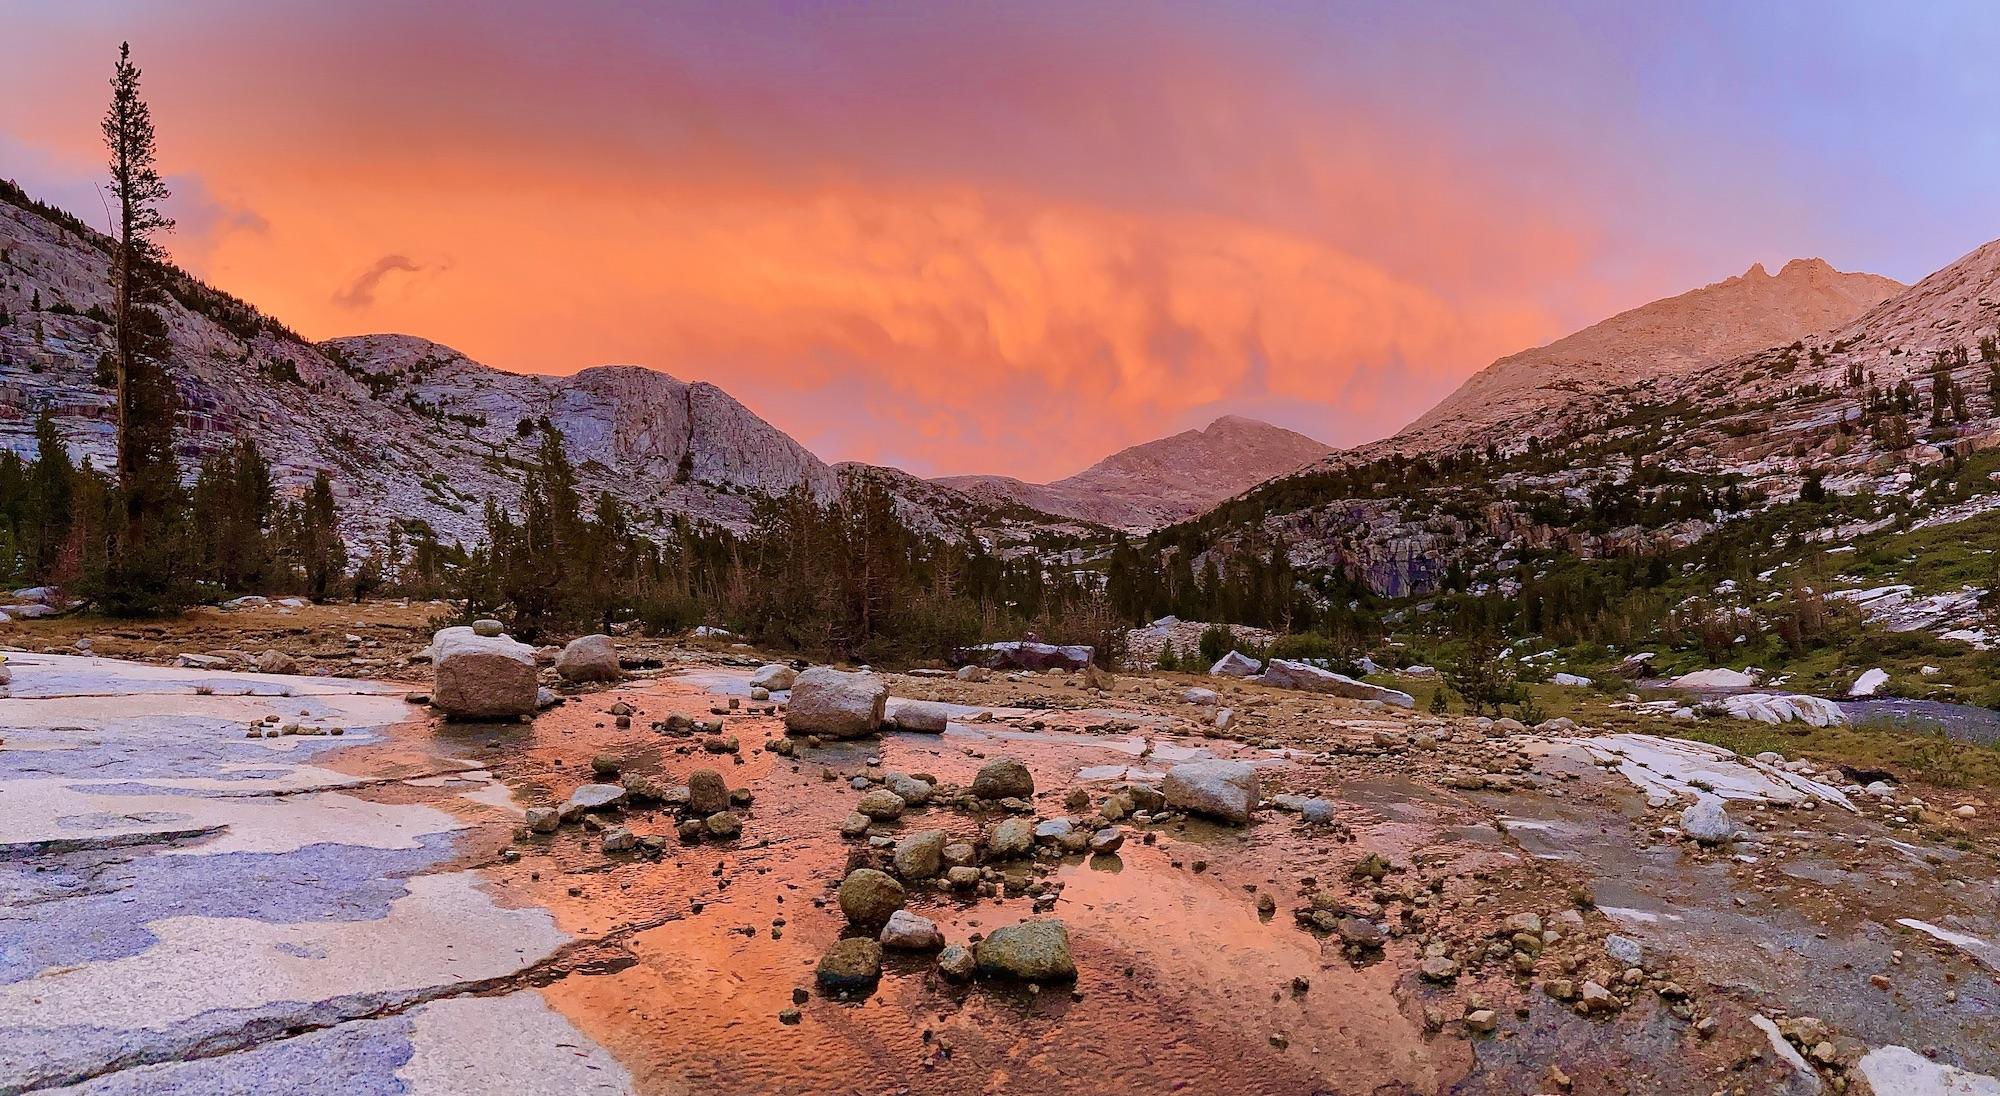 Sunset near the Lake Italy Trail in the Sierras